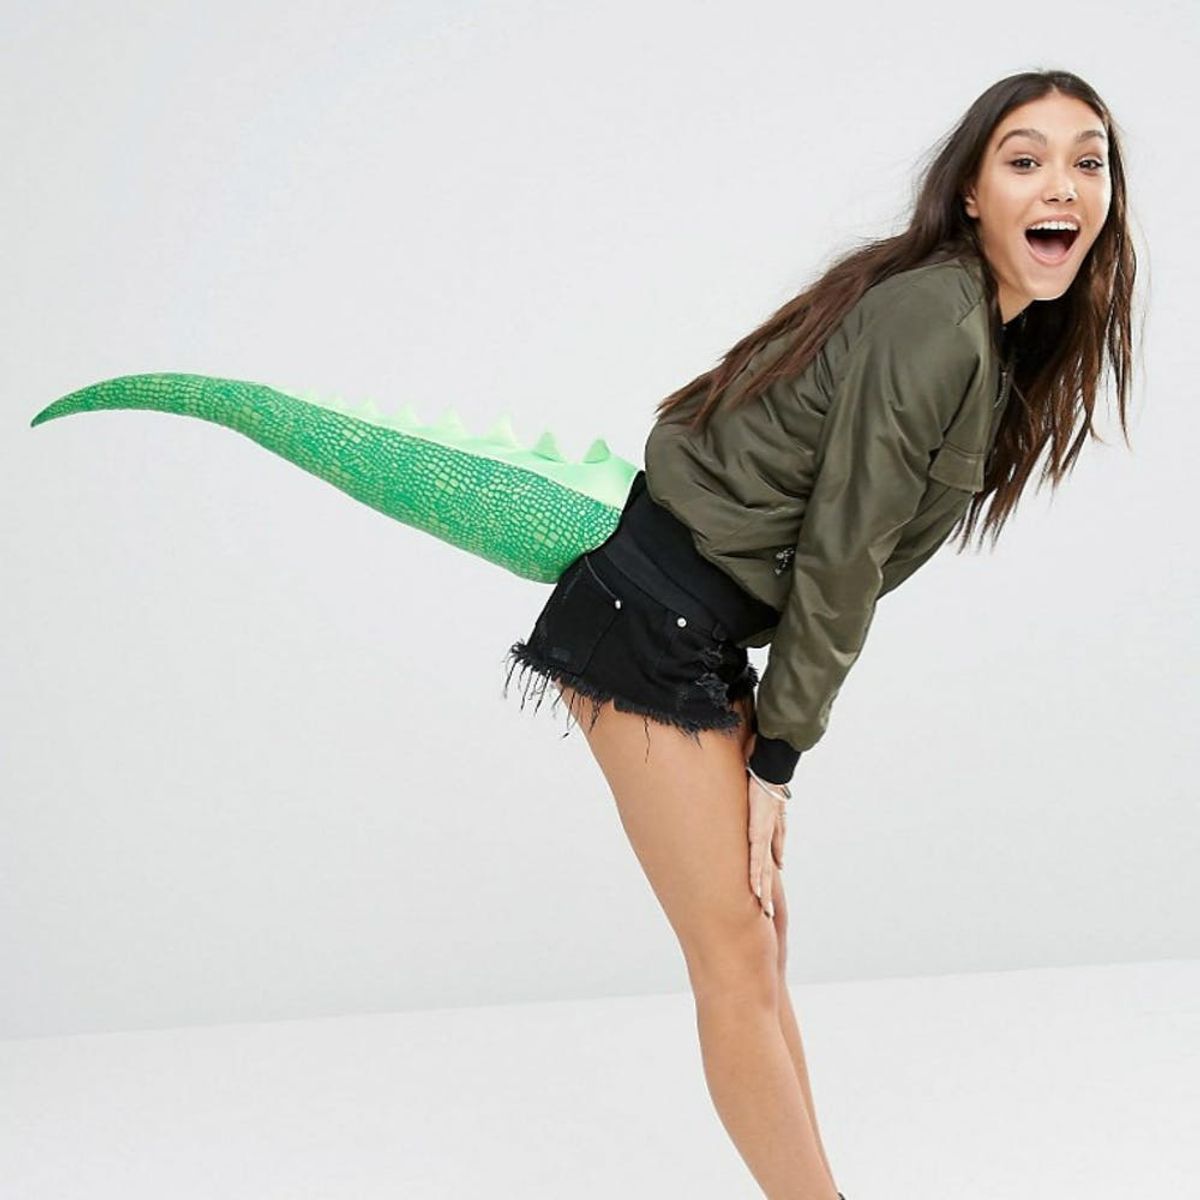 Twitter Is Having a Field Day With ASOS’s New Dinosaur Tails